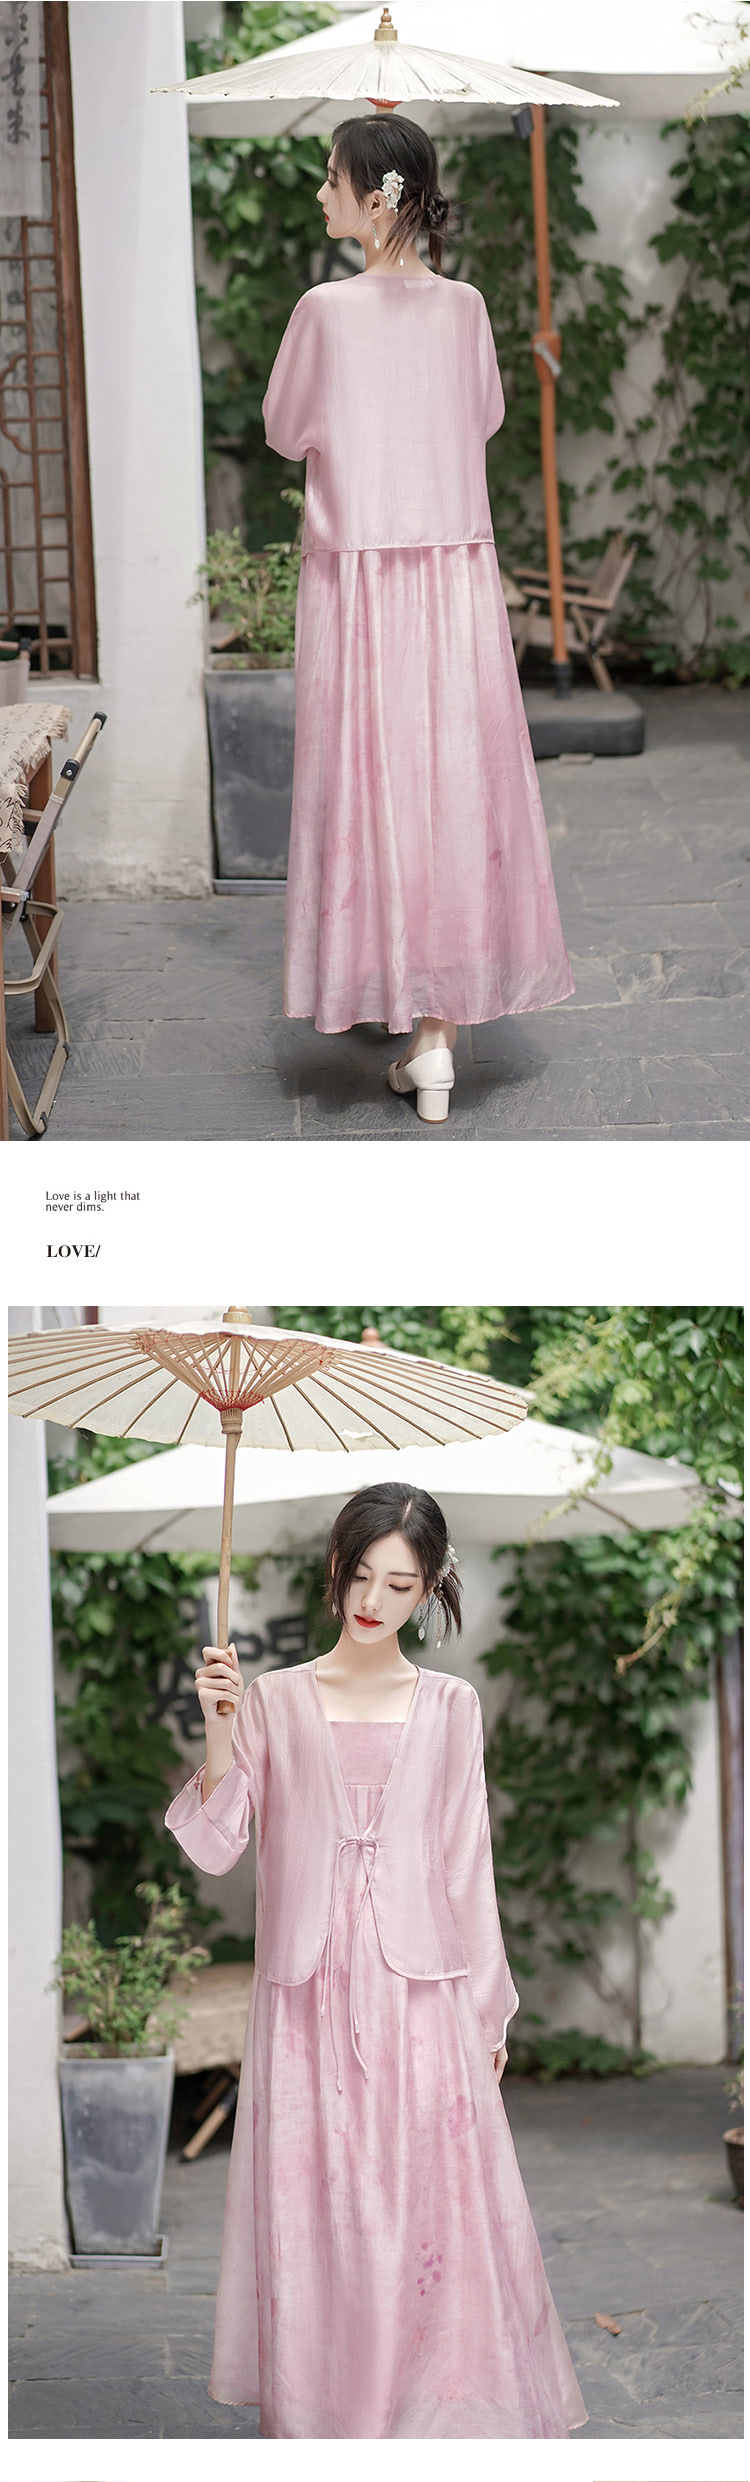 Upgraded-Modern-Chinese-Style-Loose-Fit-Casual-Dress-Summer-Outfits12